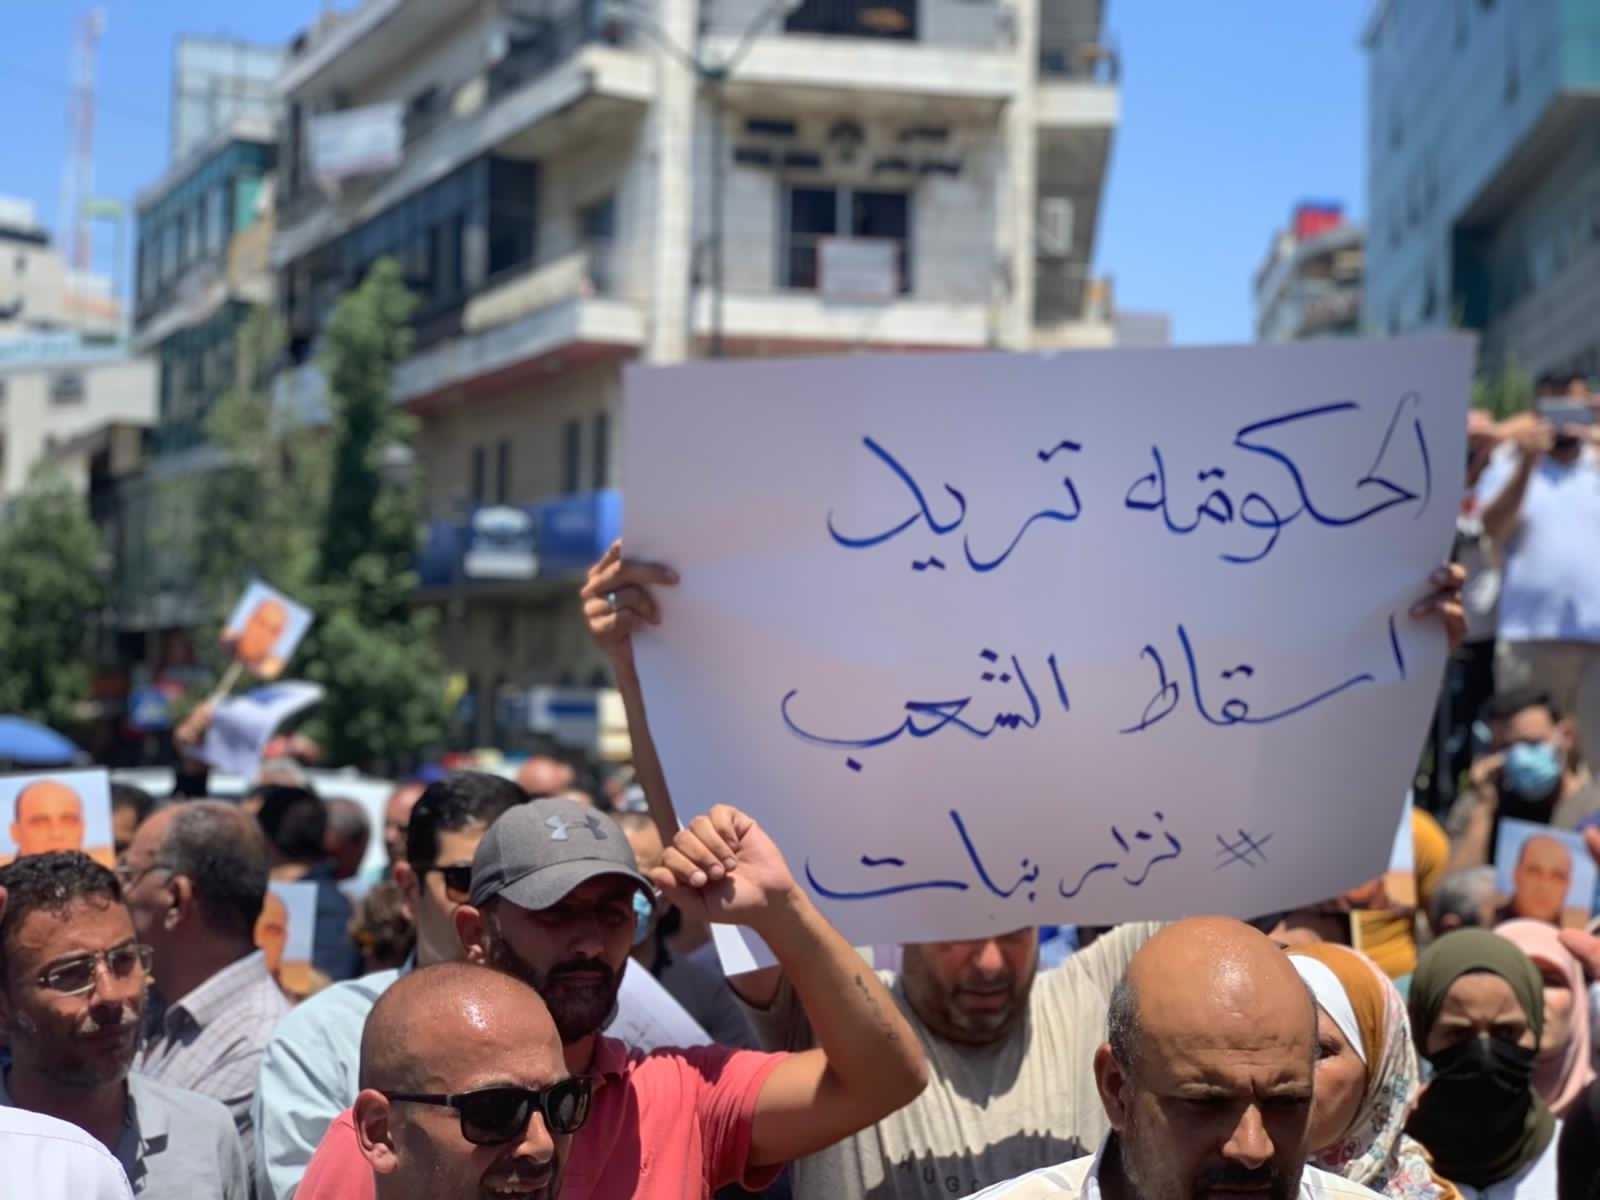 A protester in Ramallah holds a sign reading "The regime wants the downfall of the people" on 24 June 2021, after Nizar Banat's death (MEE/Shatha Hammad)